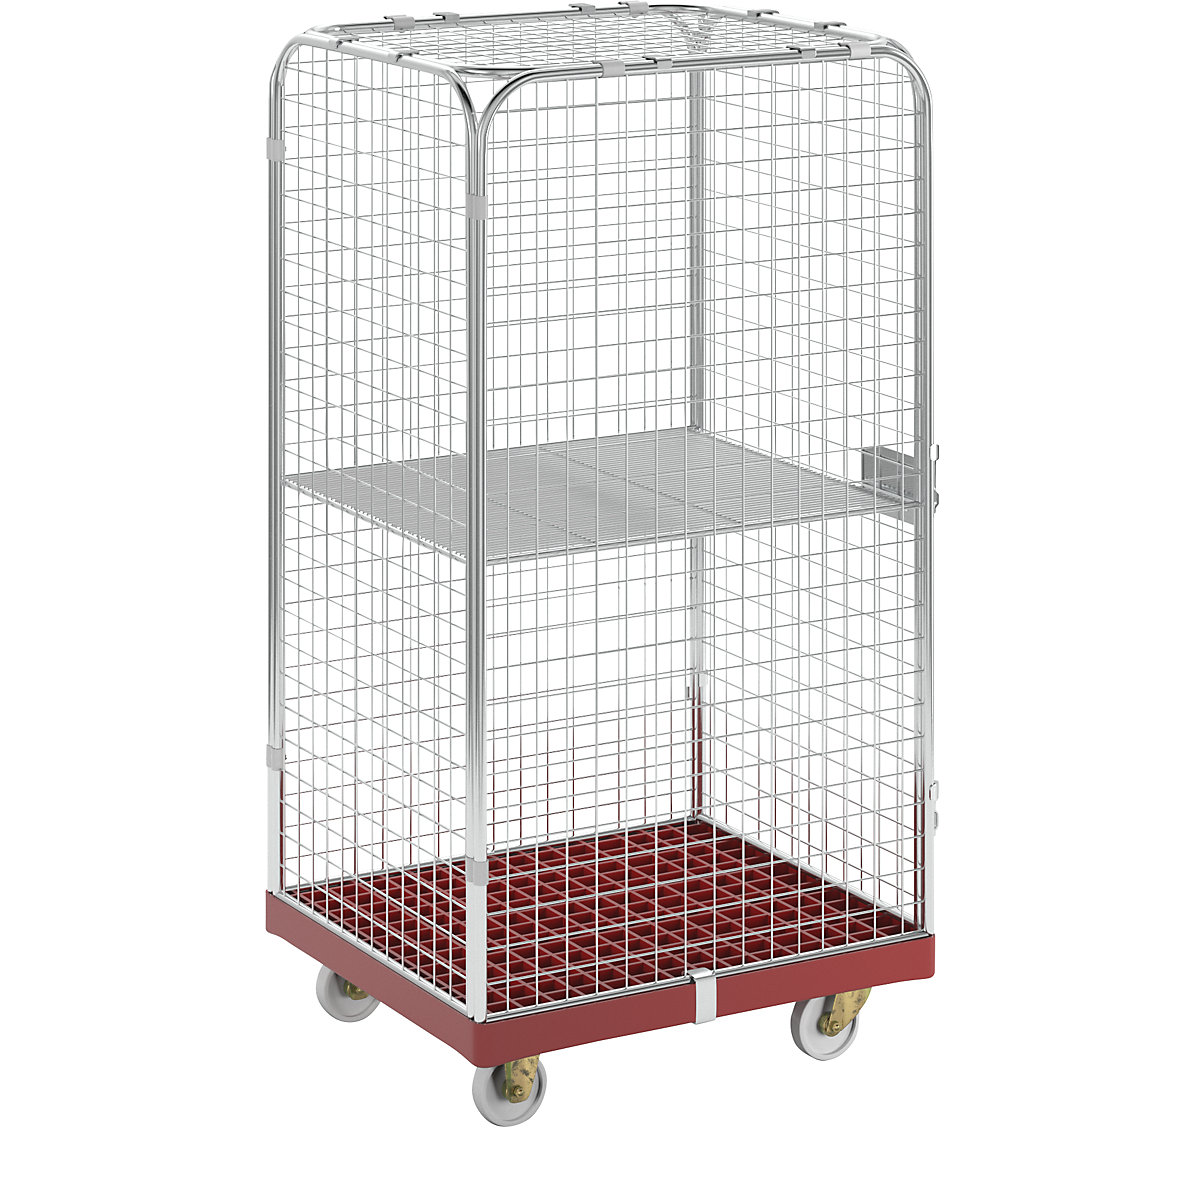 SAFE roll container, HxWxD 1550 x 720 x 810 mm, red transport dolly-2